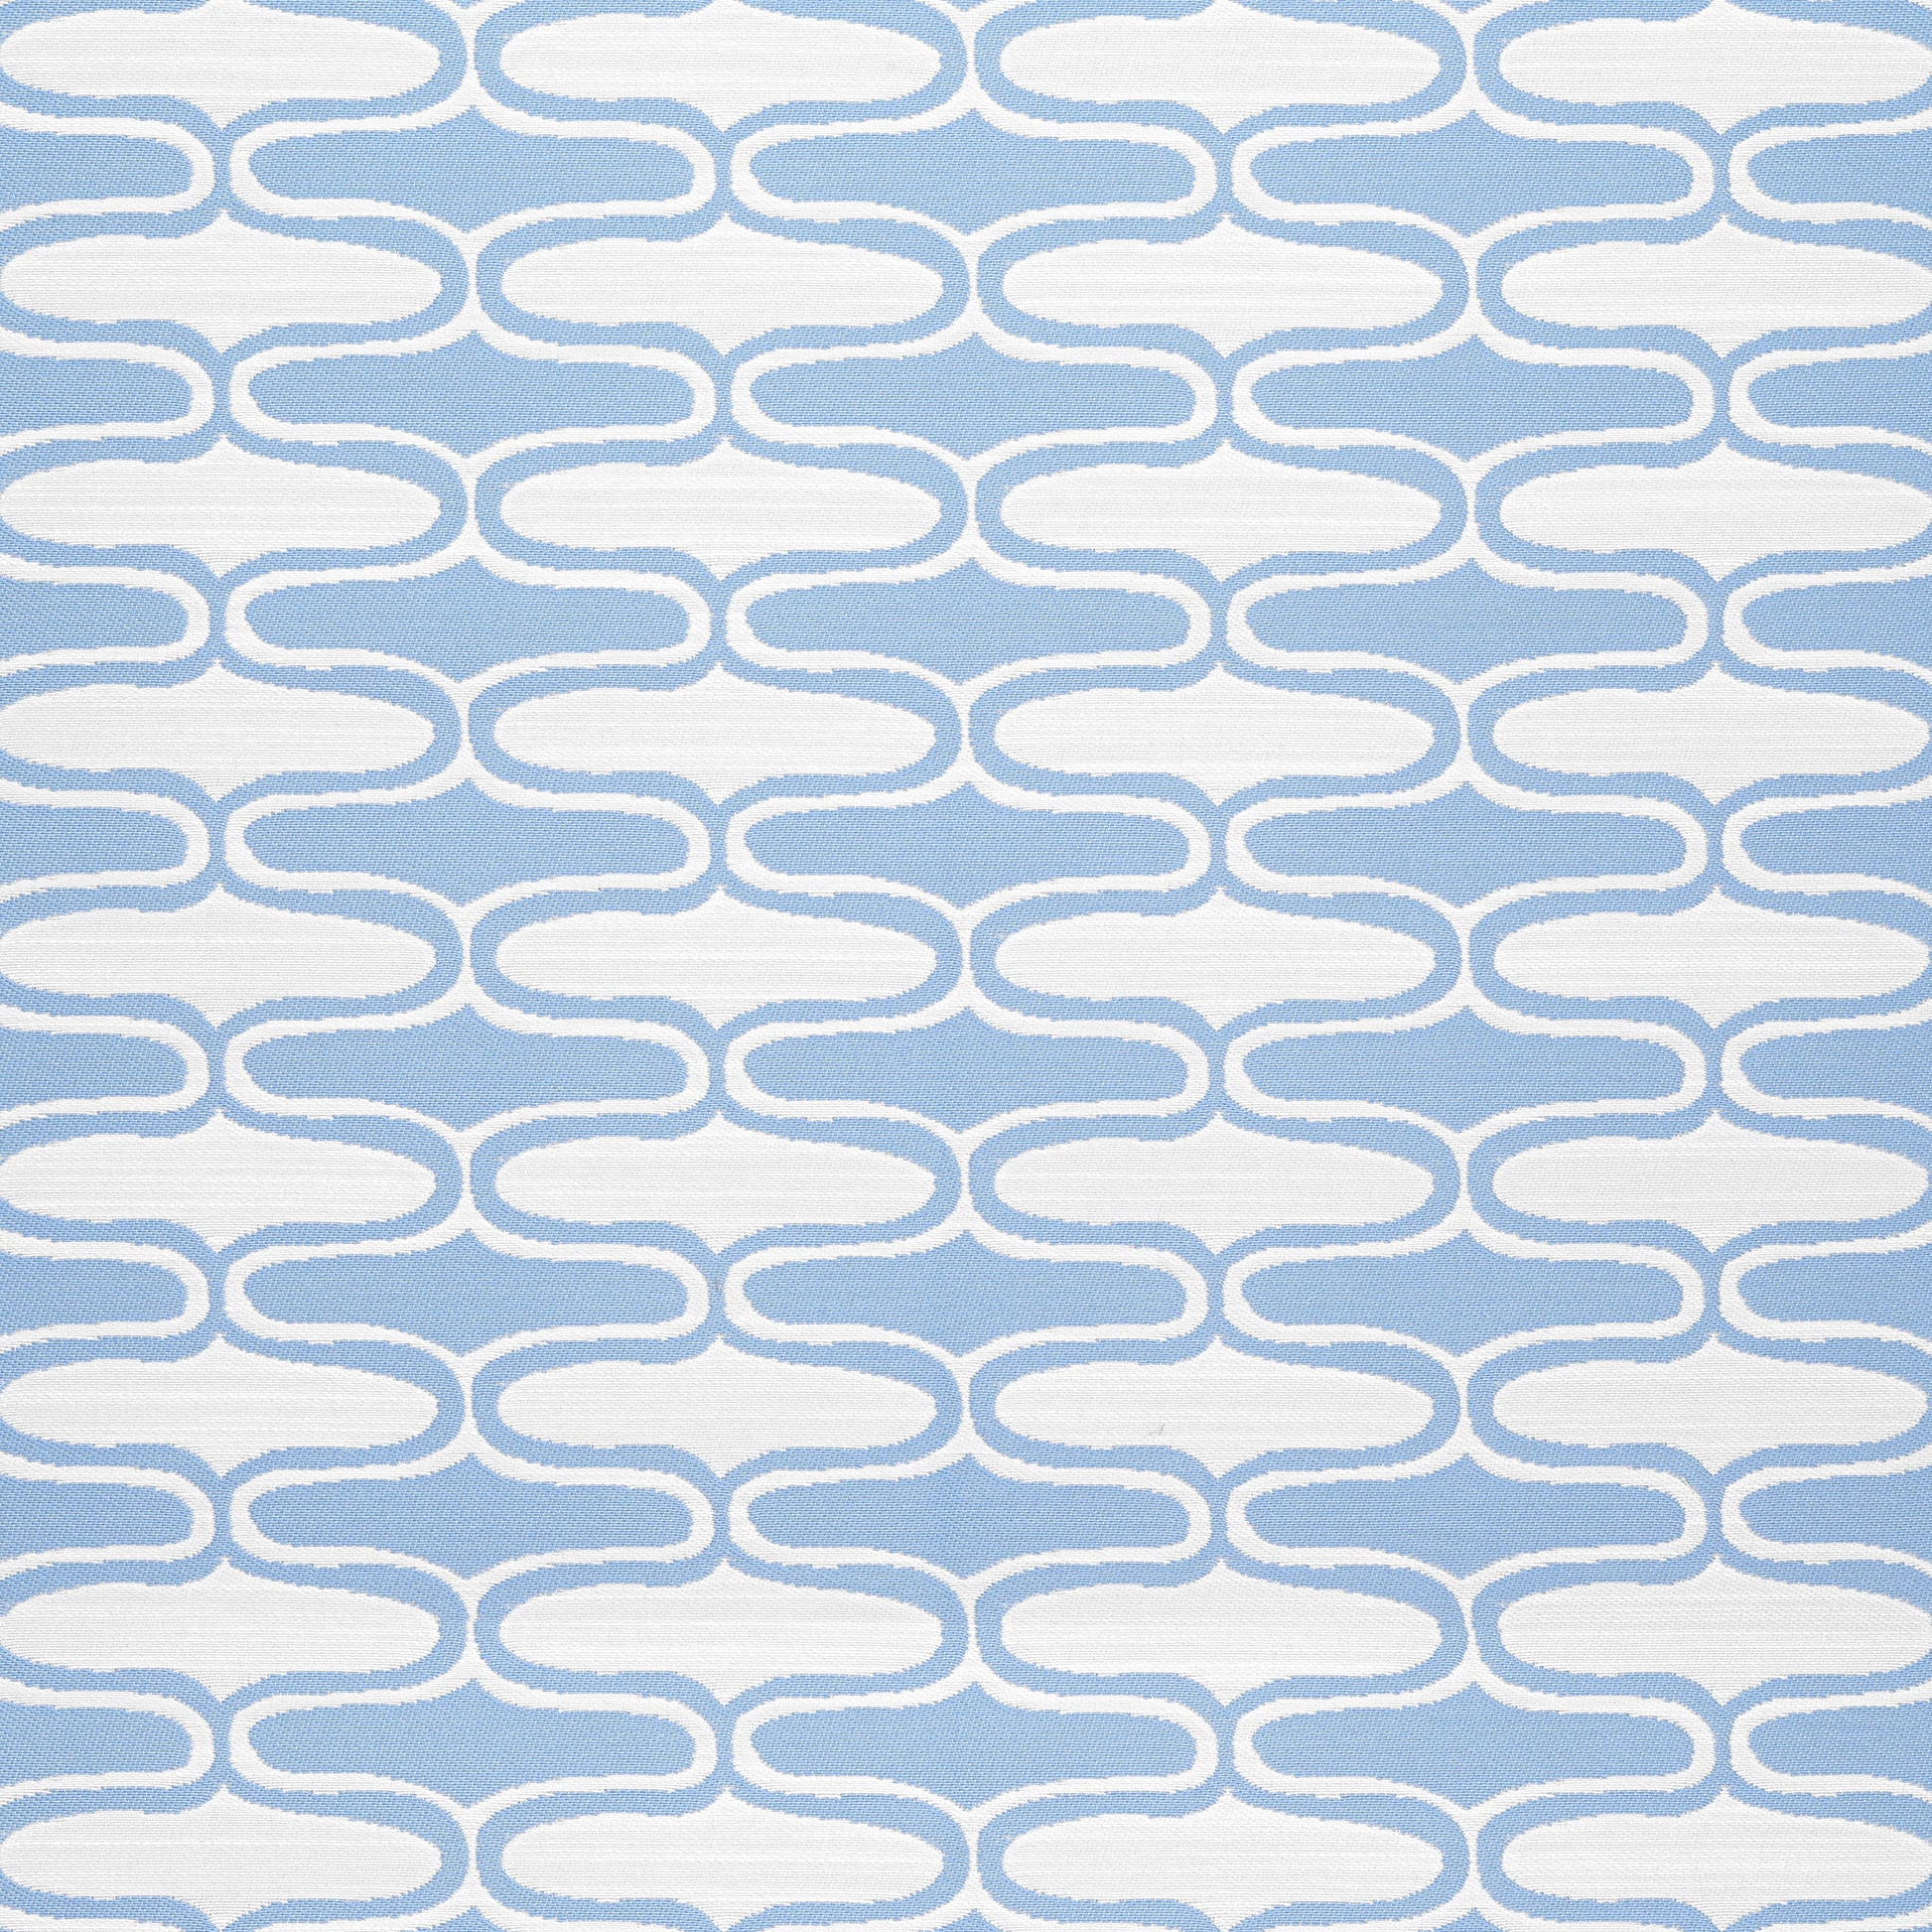 Purchase Thibaut Fabric Item# W8534 pattern name Saraband color Sky